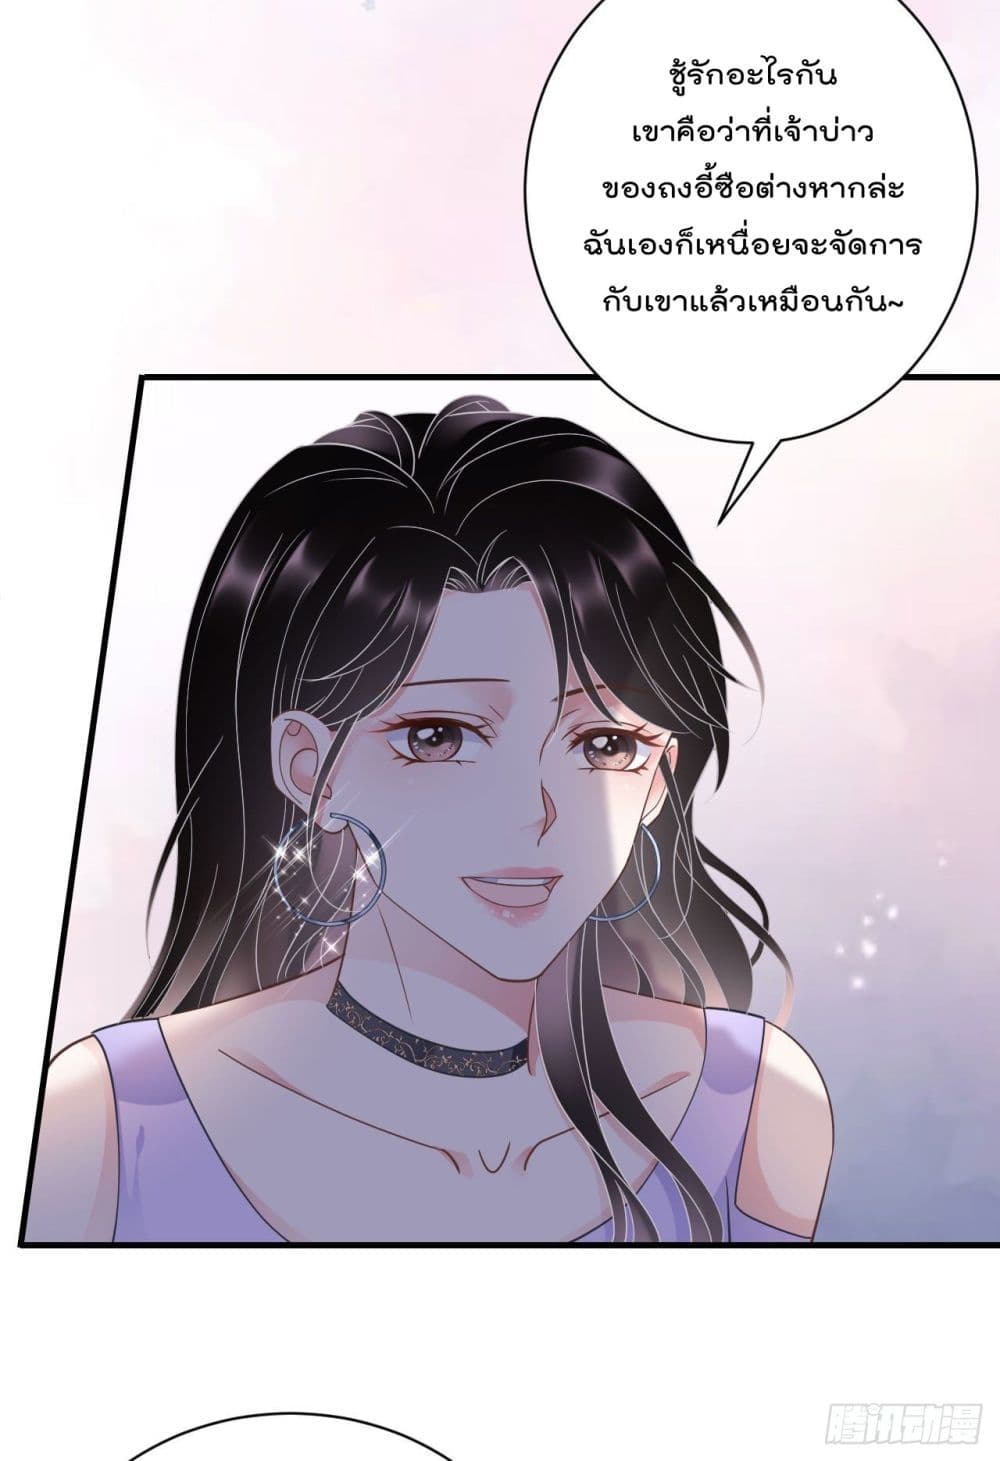 What Can the Eldest Lady Have คุณหนูใหญ่ ทำไมคุณร้ายอย่างนี้ 16-16